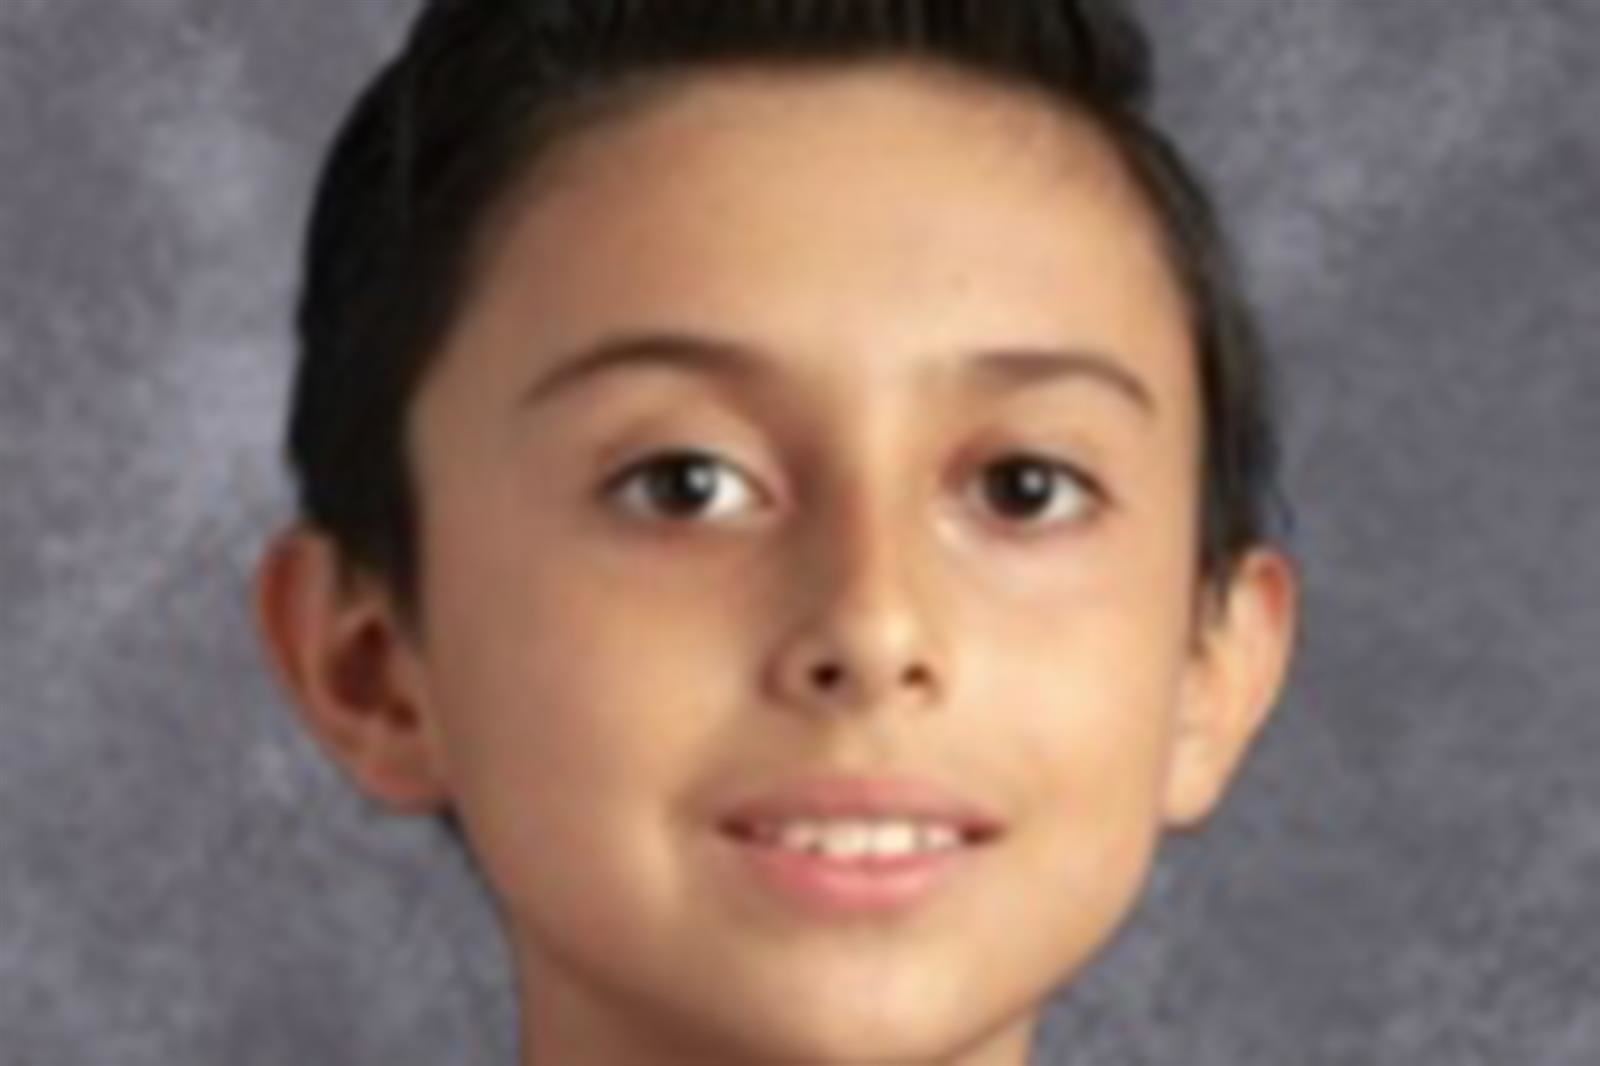  Bane Elementary School fourth grade student Erick Galvan Gutierrez is a well-rounded student.